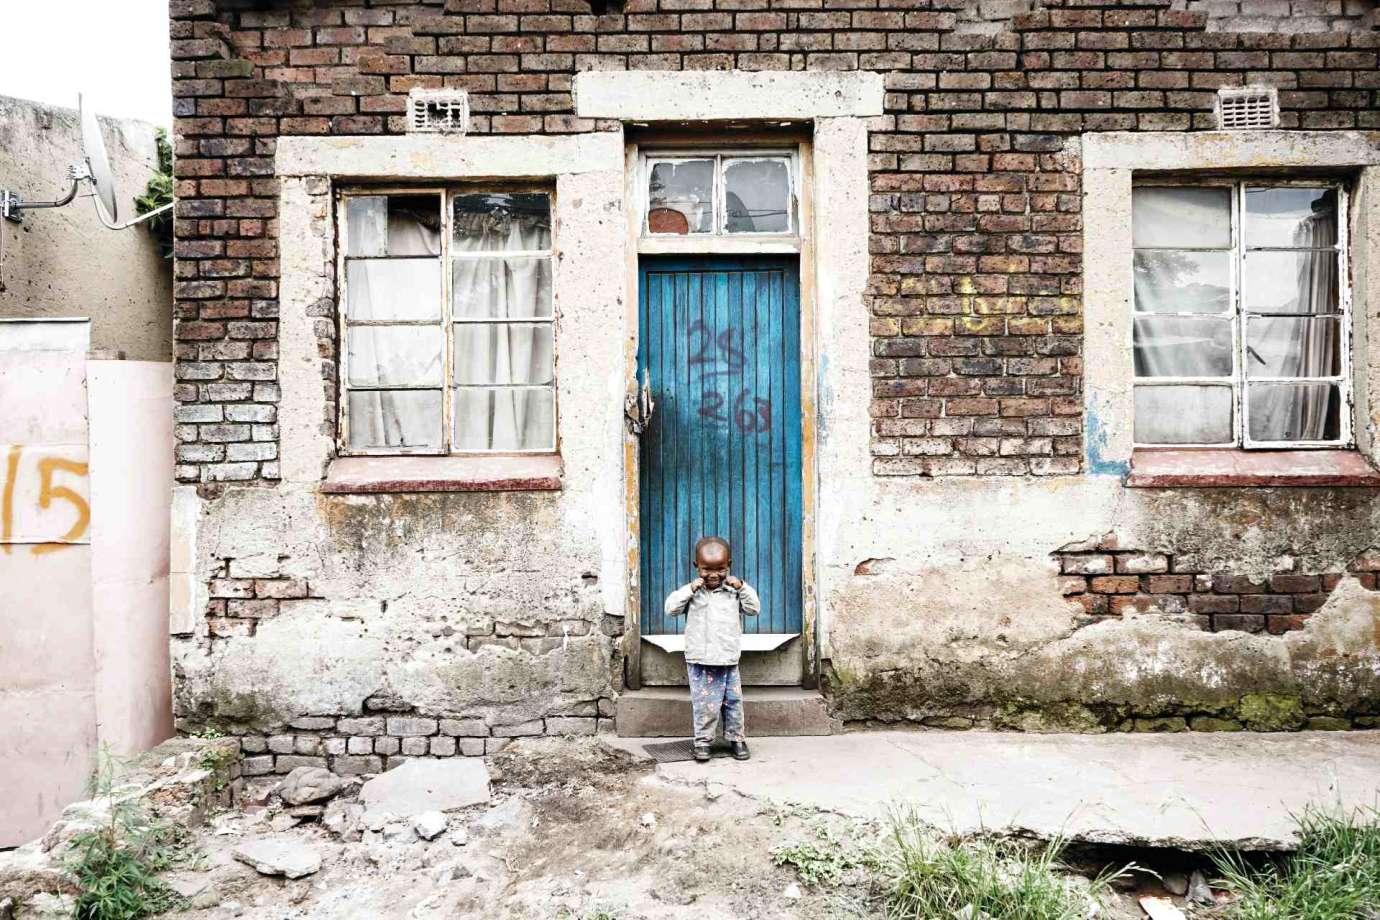 A photograph of a small boy standing in front of a blue door of a brick building by artists Samantha Everette